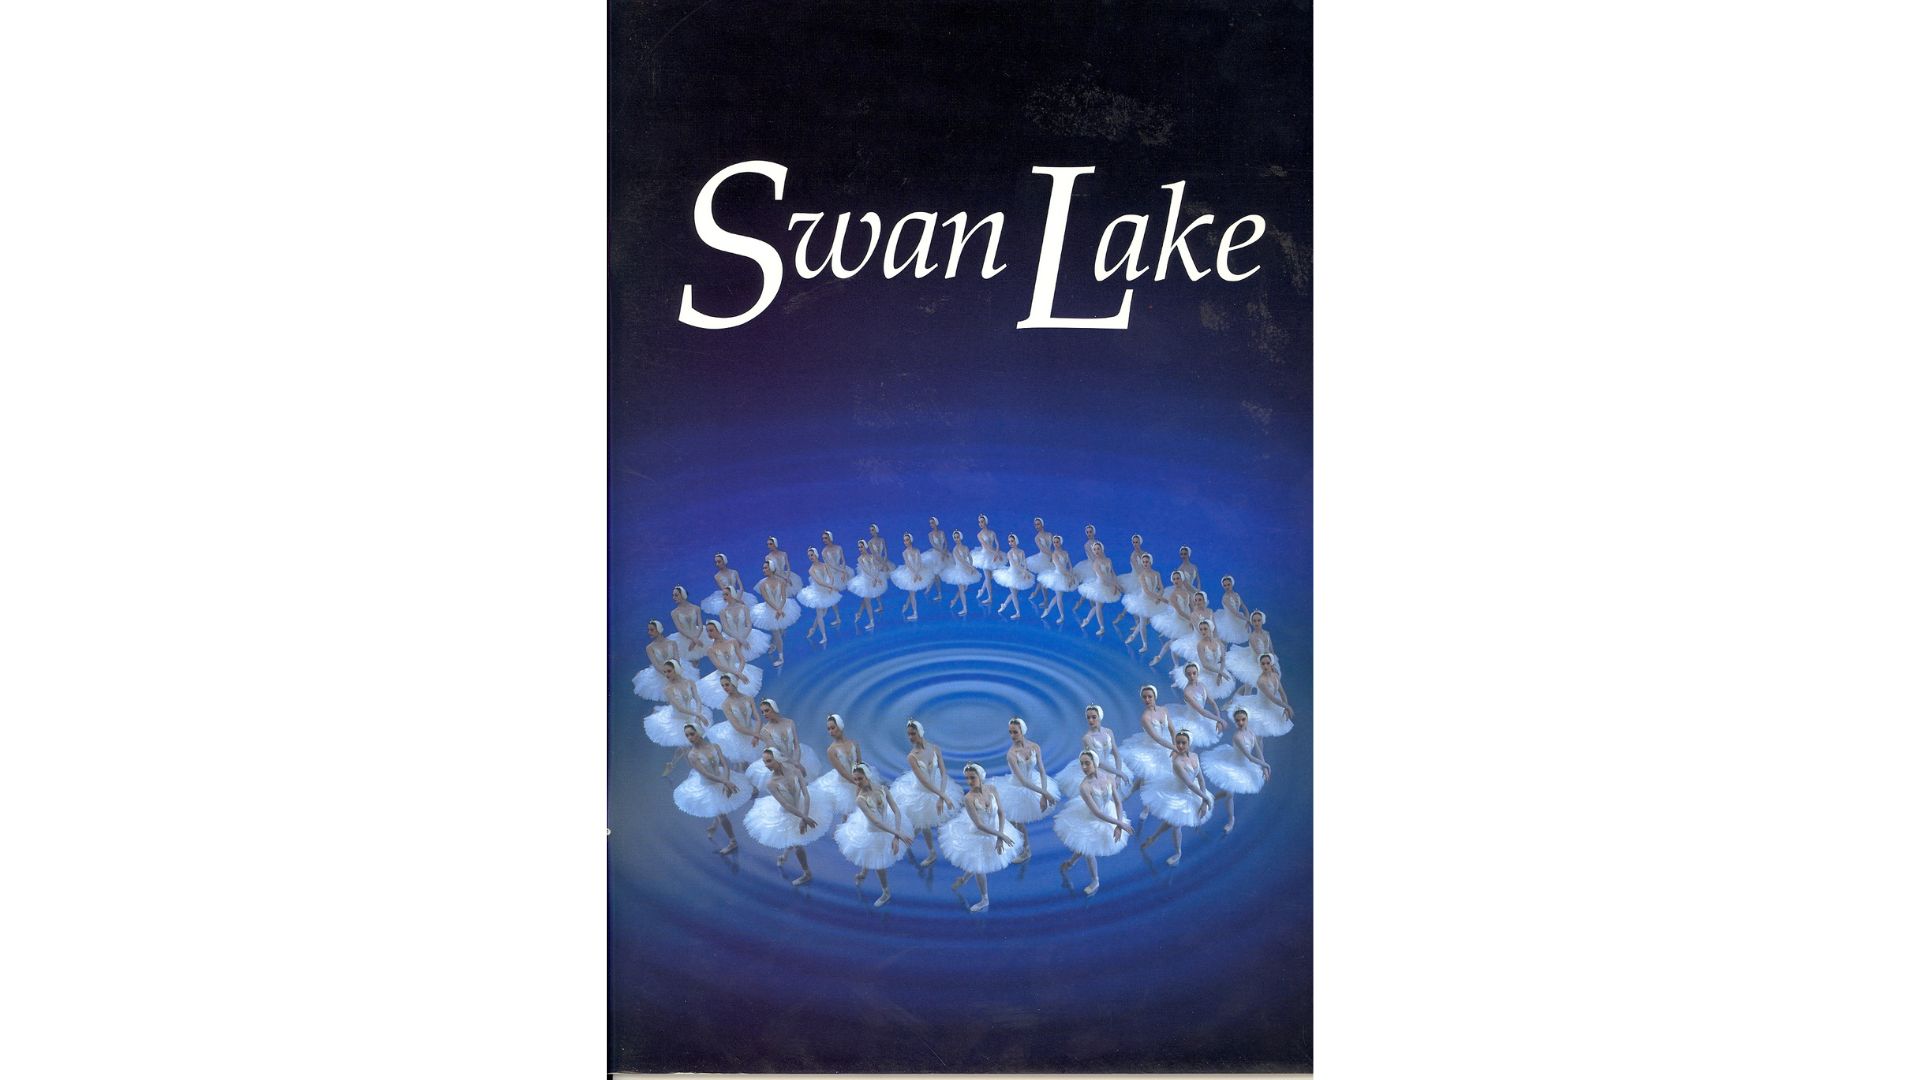 Cover of the programme for the 1997 run of Swan Lake in-the-round